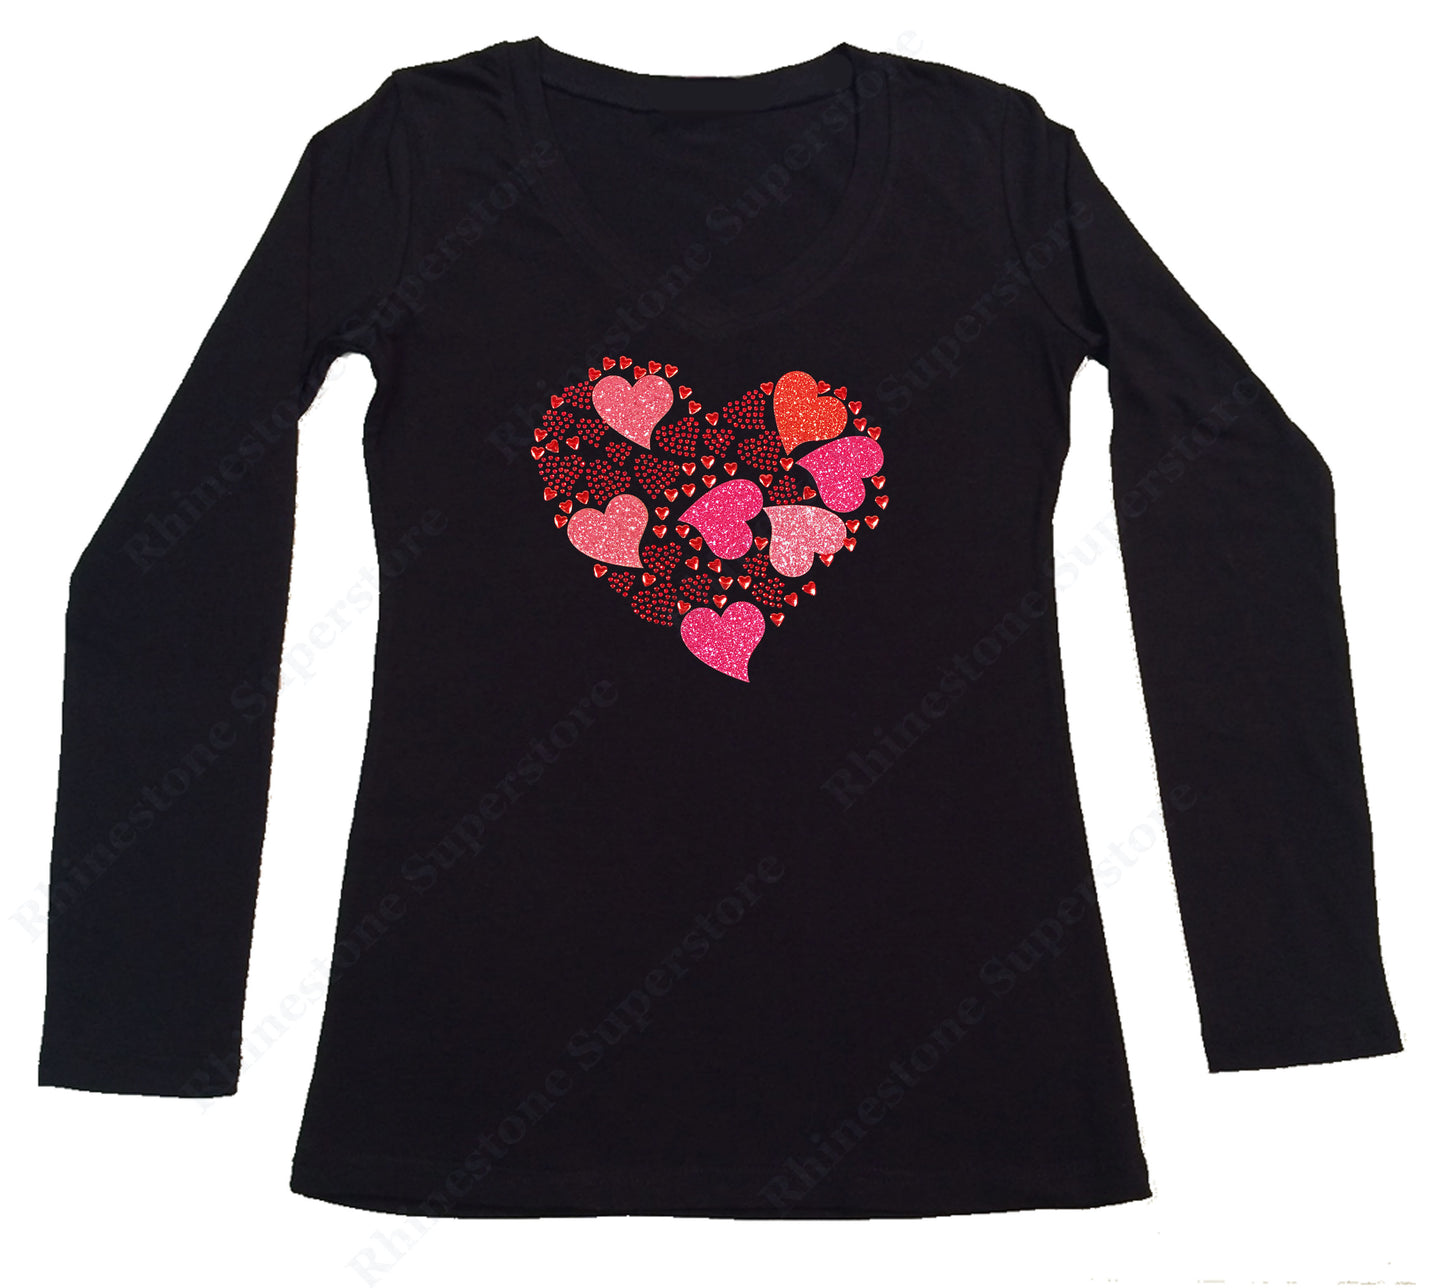 Womens T-shirt with Hearts Collage in Rhinestones and Glitters